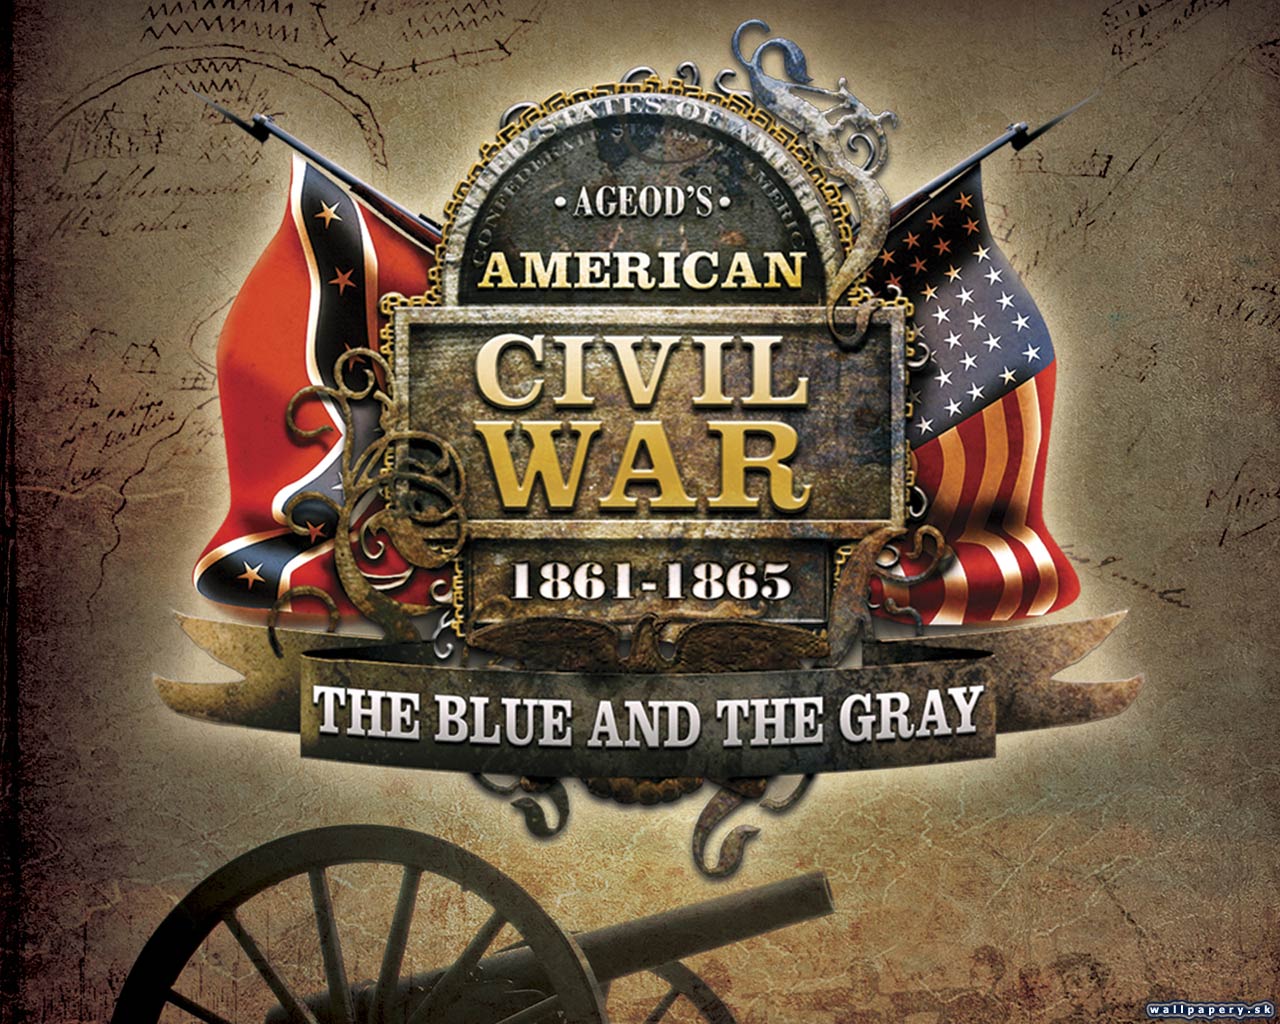 Ageod's American Civil War - The Blue and the Gray - wallpaper 6